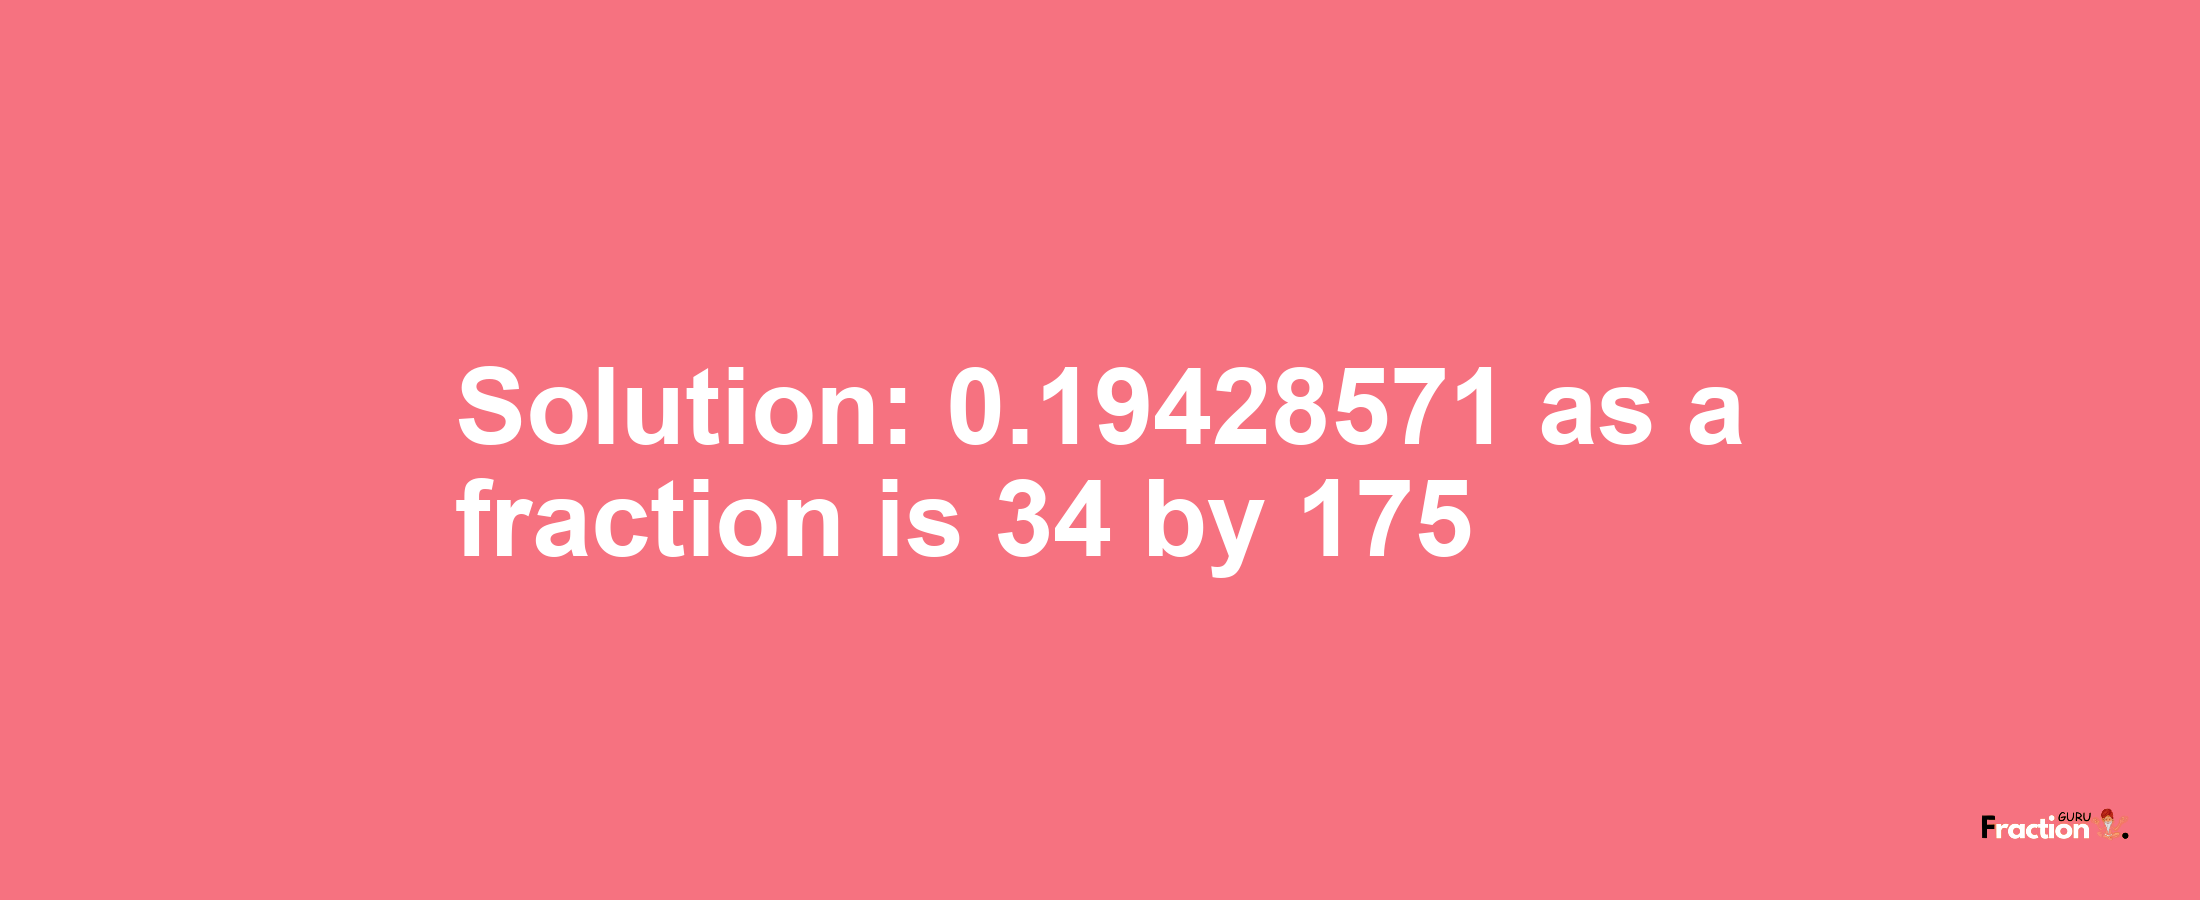 Solution:0.19428571 as a fraction is 34/175